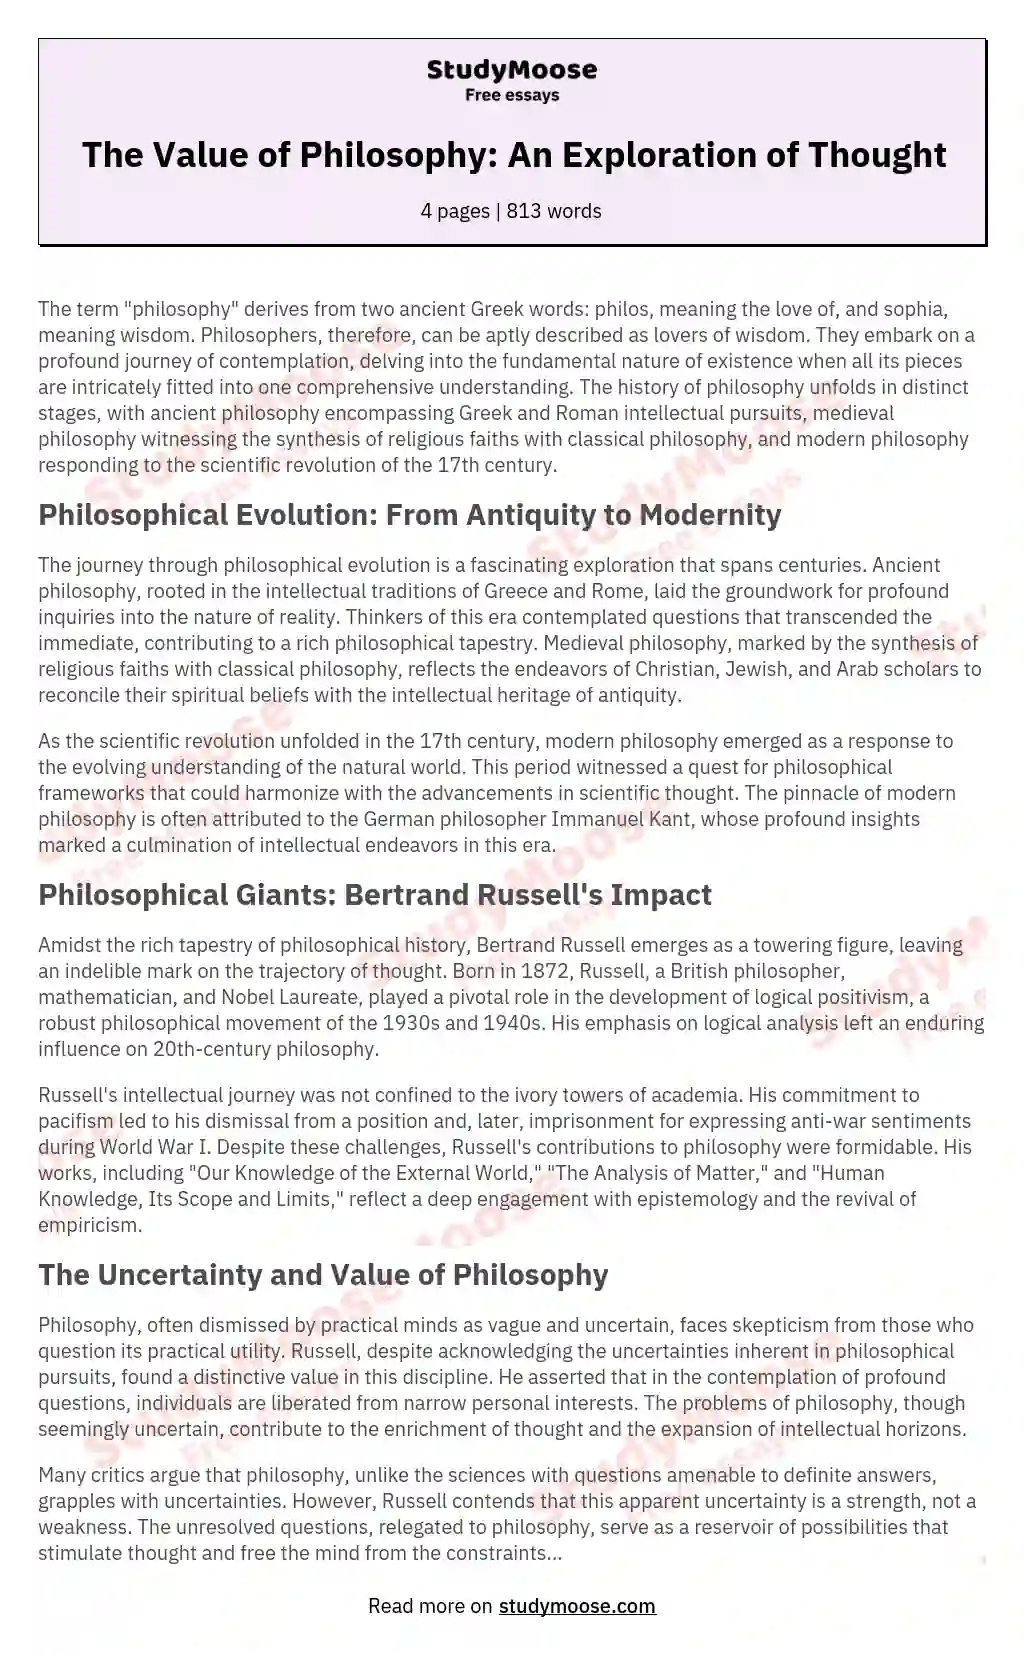 The Value of Philosophy: An Exploration of Thought essay